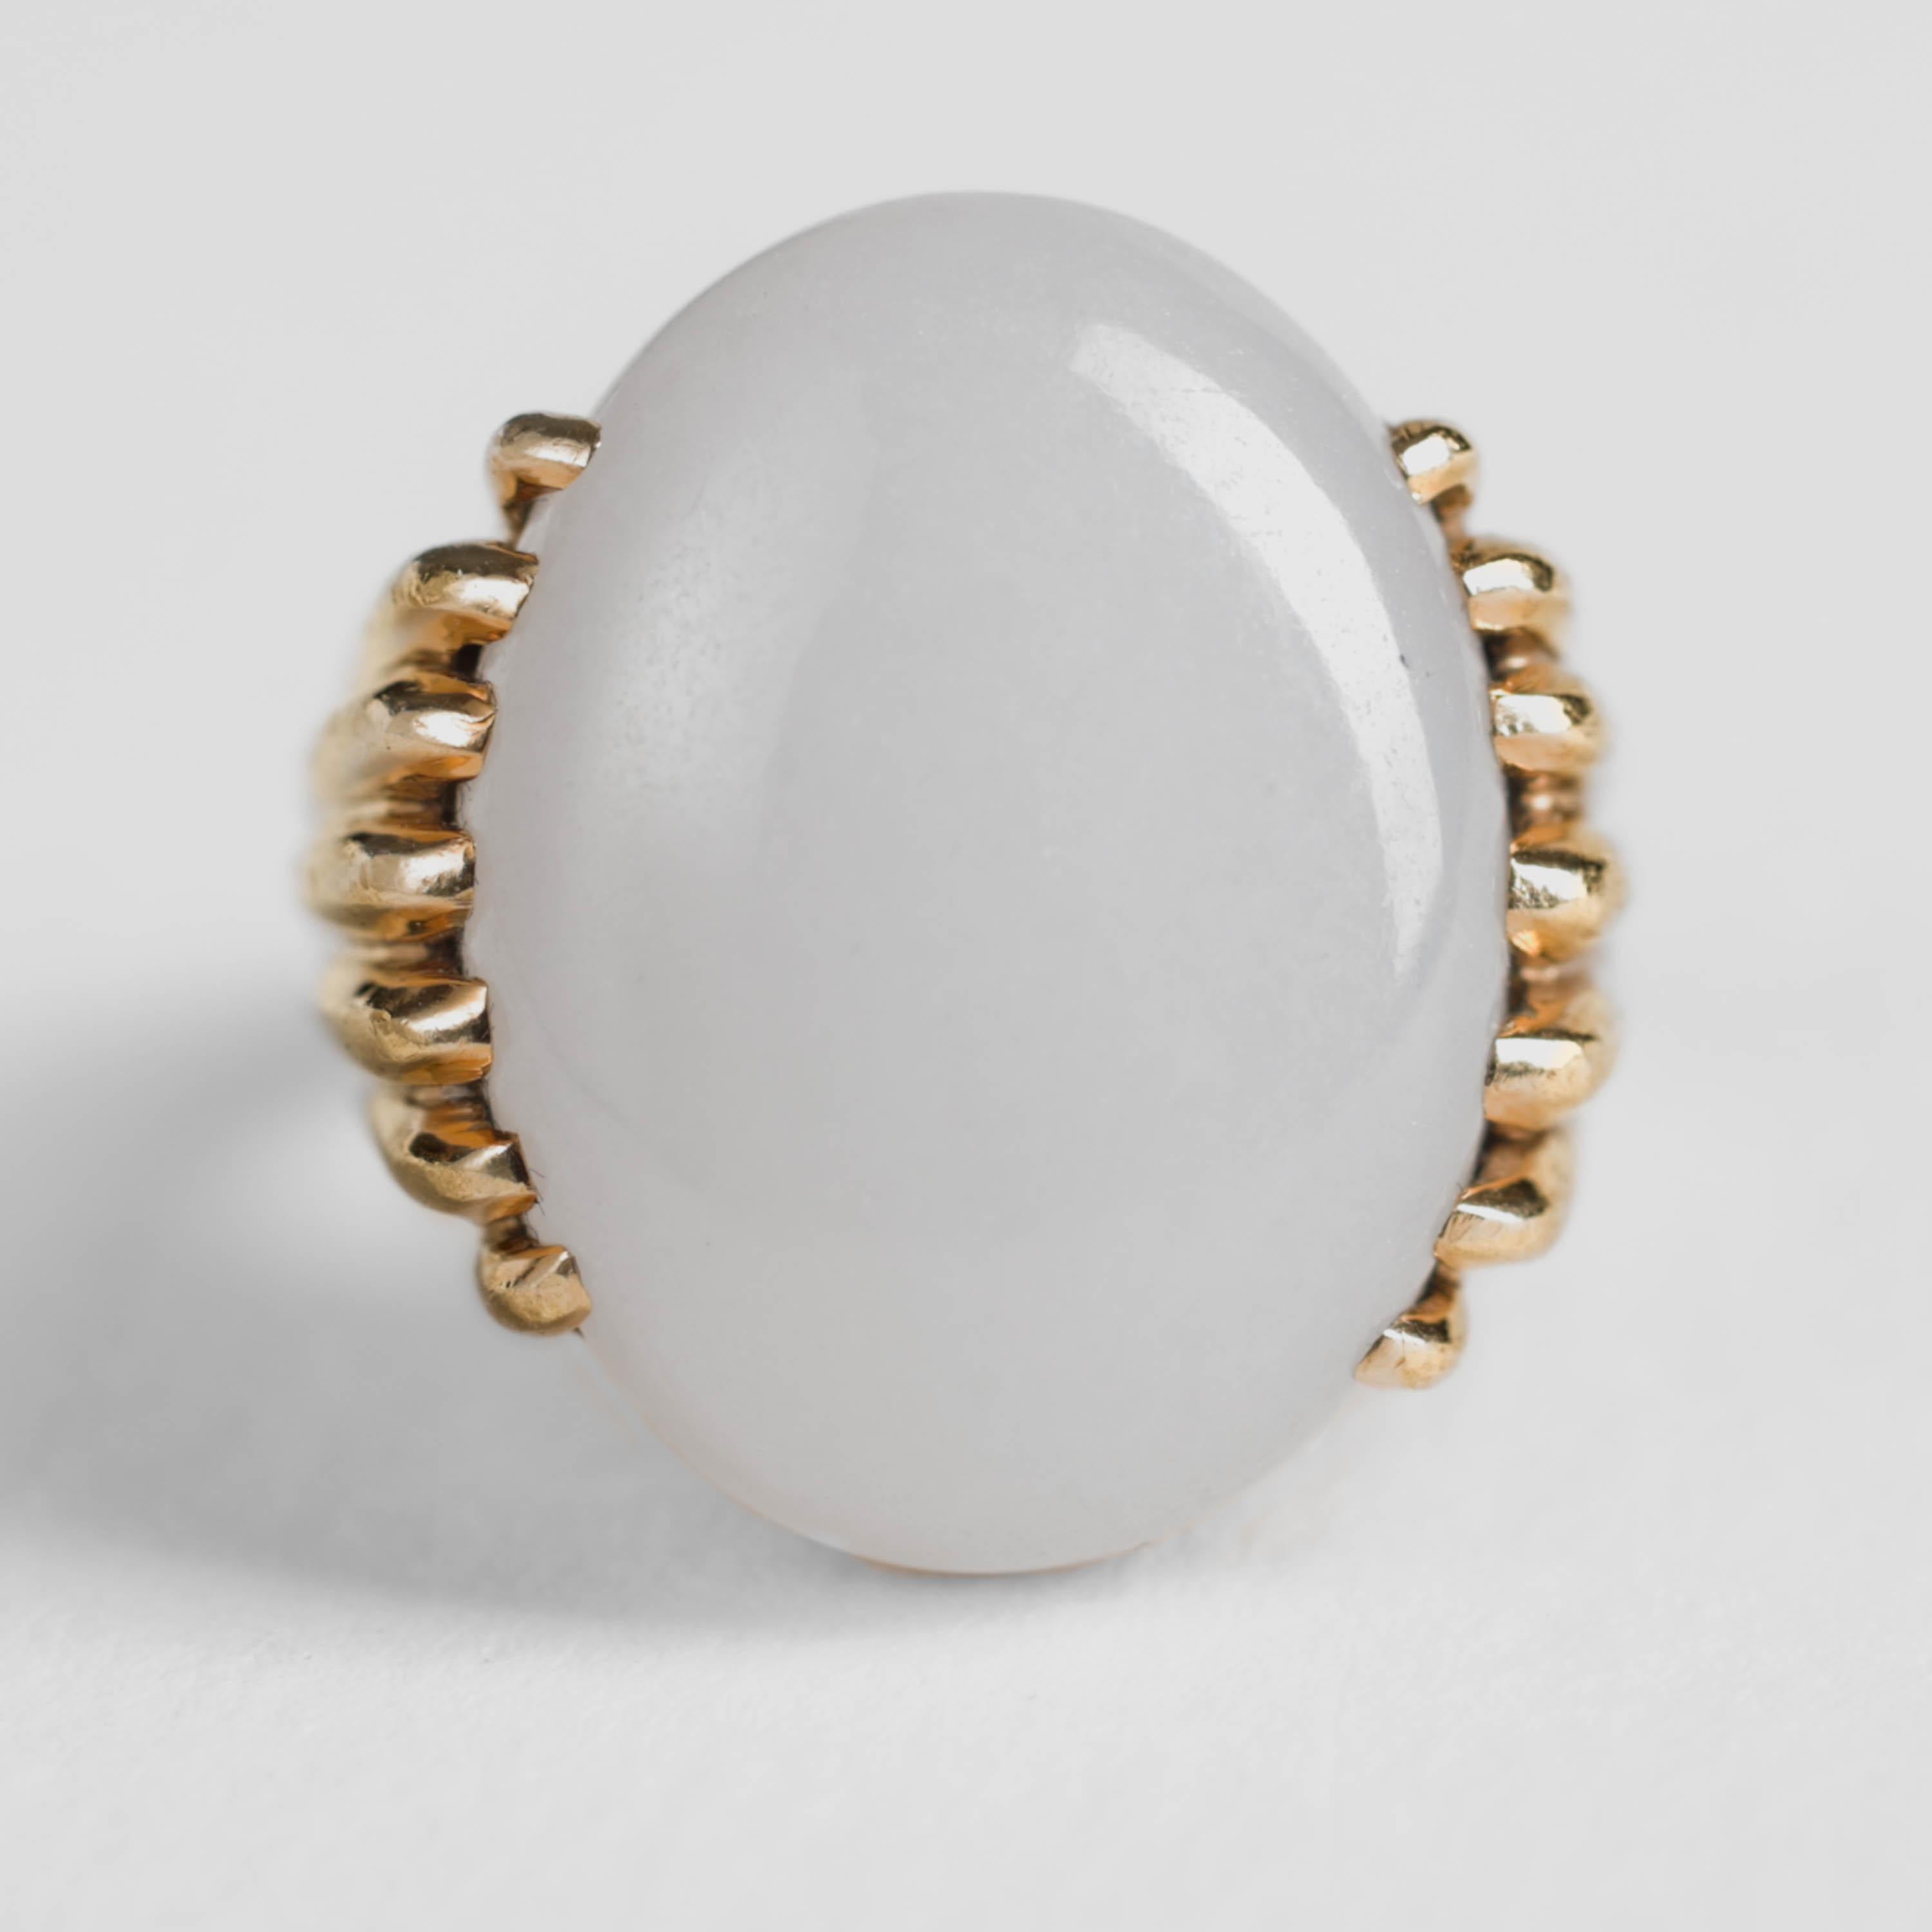 Perfectly unisex and exceedingly rare, this is an original Gump's San Francisco jade ring featuring an oval cabochon of natural and untreated white jadeite jade set into a hand-crafted 18k yellow gold mounting. 

The original Gump's of San Francisco